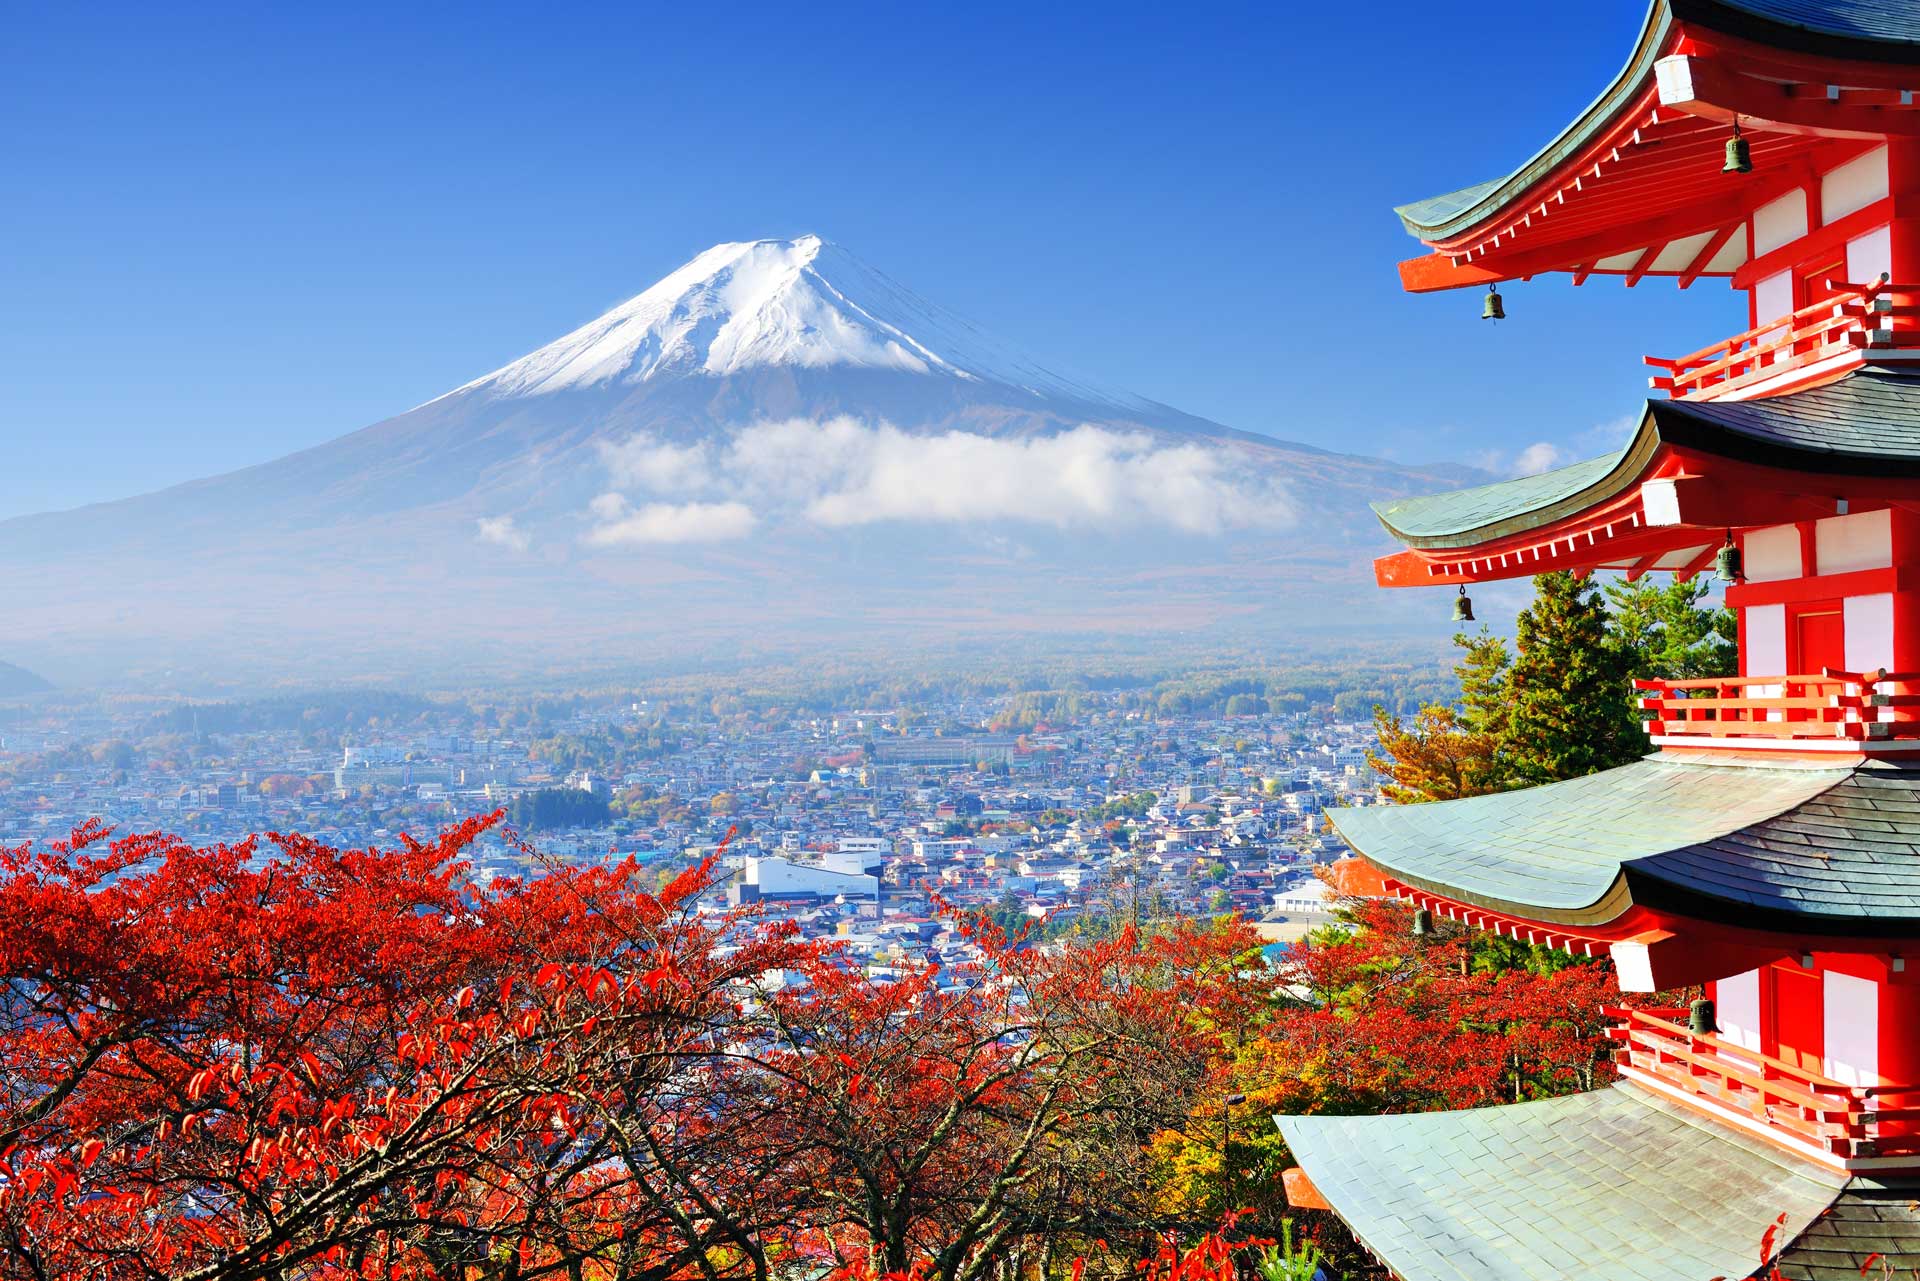 Mt. Fuji with fall colors in Japan.